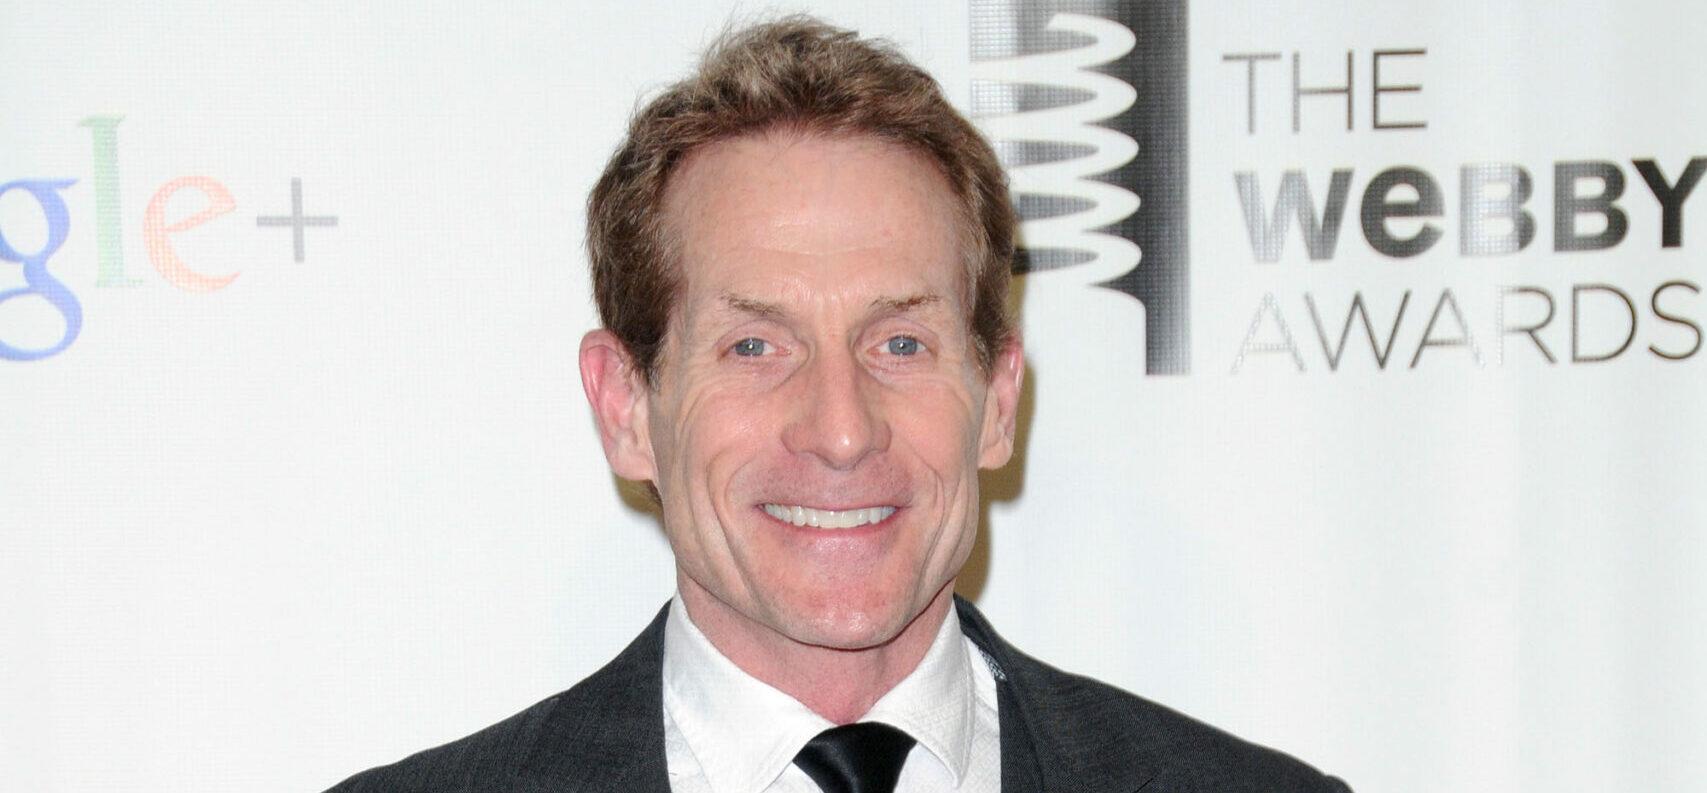 Skip Bayless Issues On-Air Apology After Backlash Over Damar Hamlin Injury